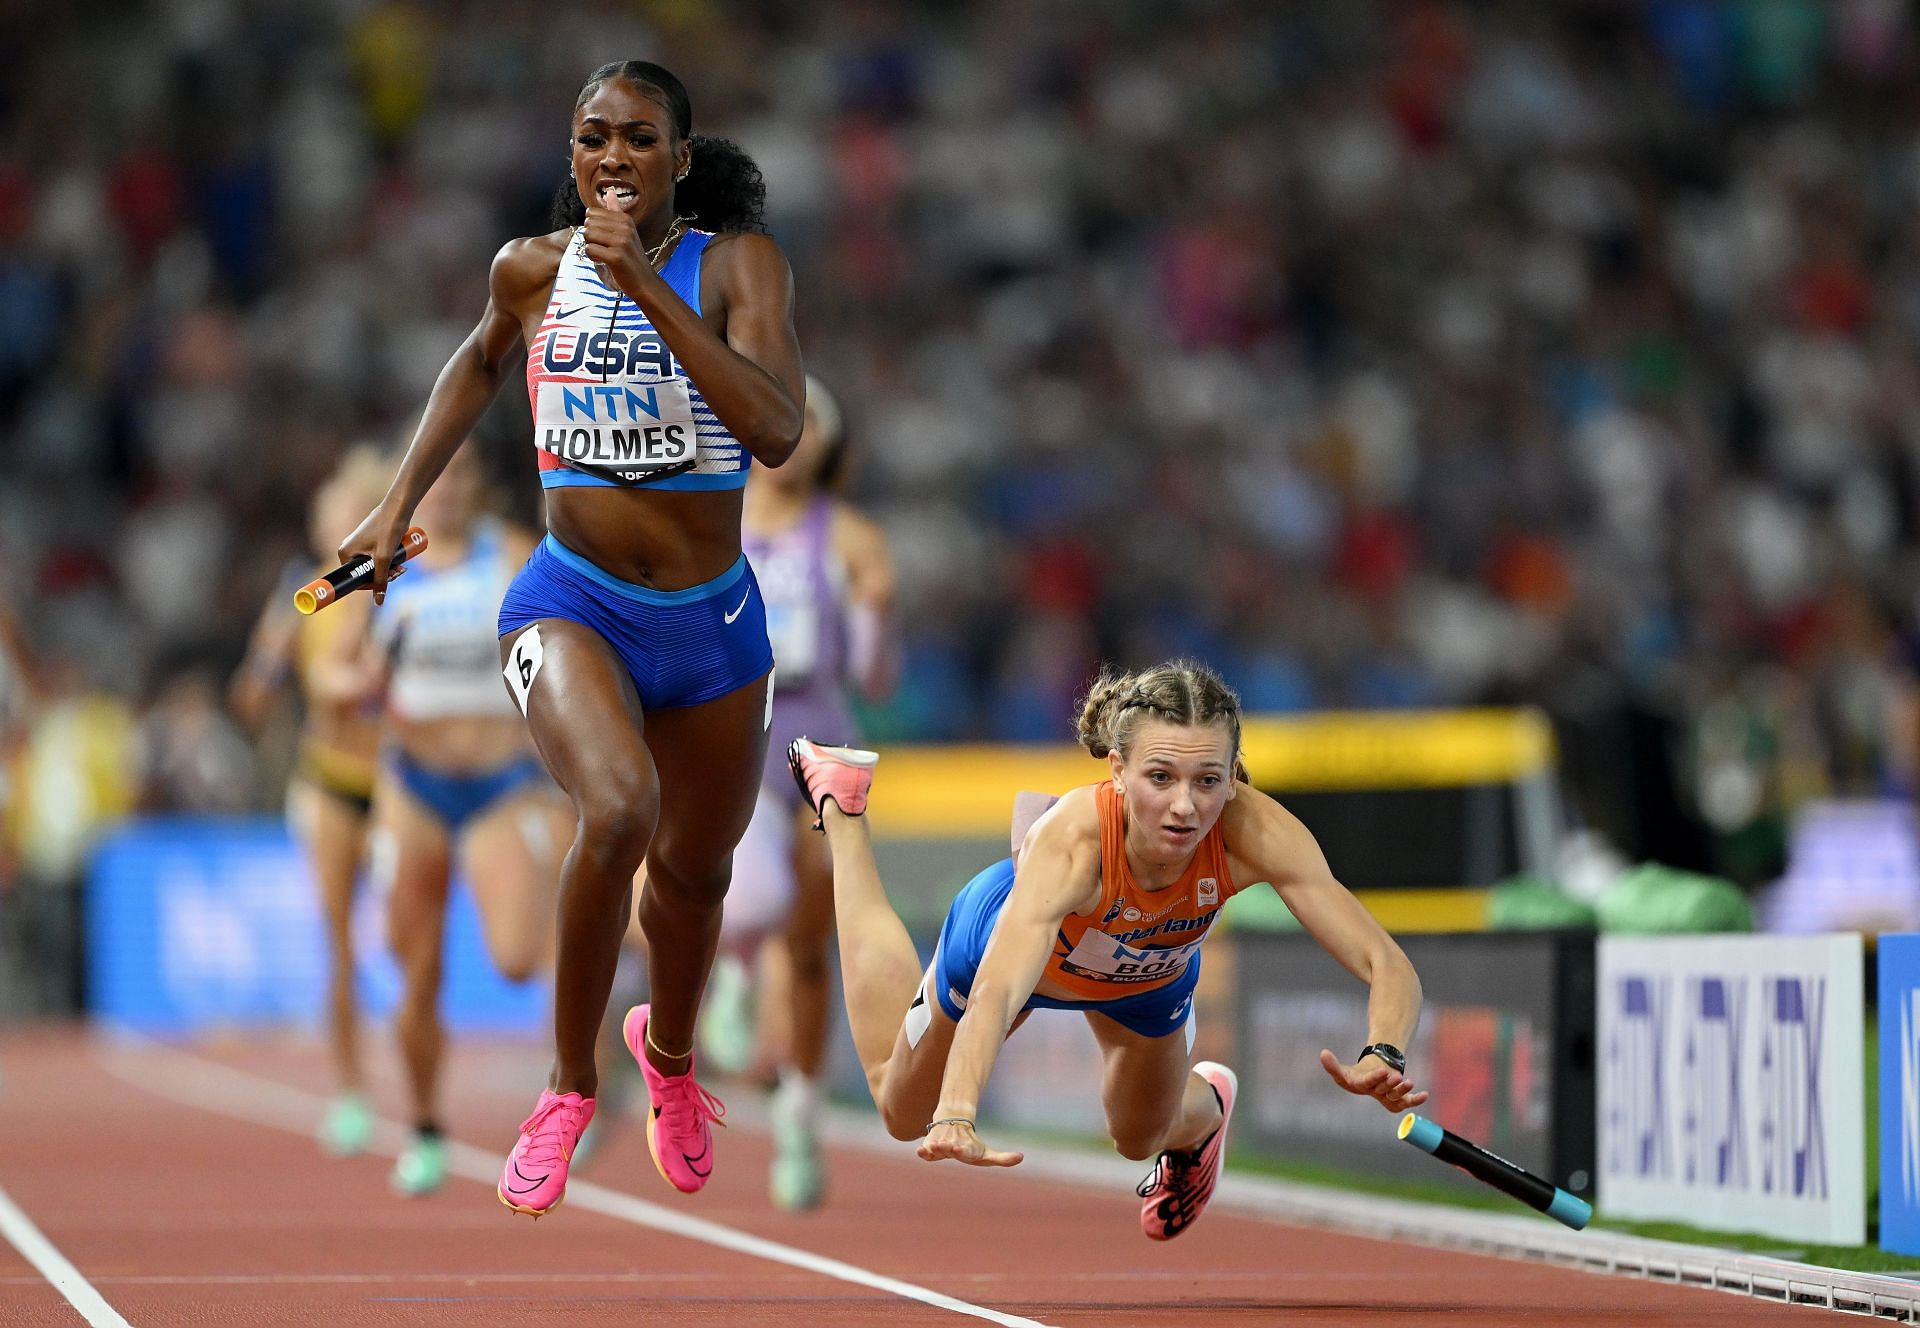 Holmes at mixed 4x100m relay race at Day 1 of World Athletics Championships Budapest 2023